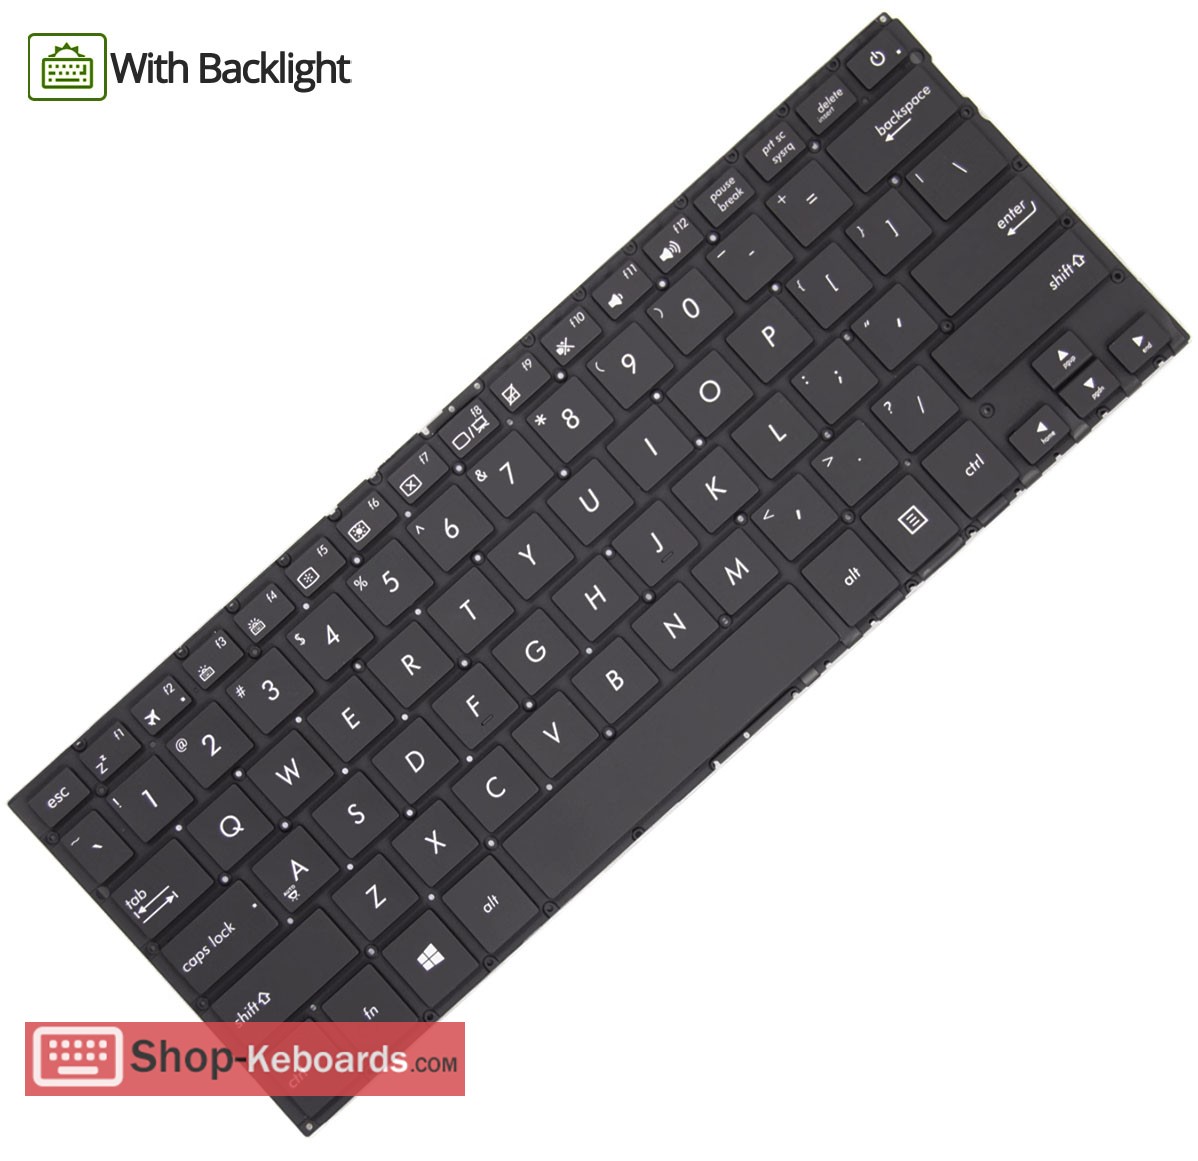 Asus 0KNB0-2627FR00 Keyboard replacement